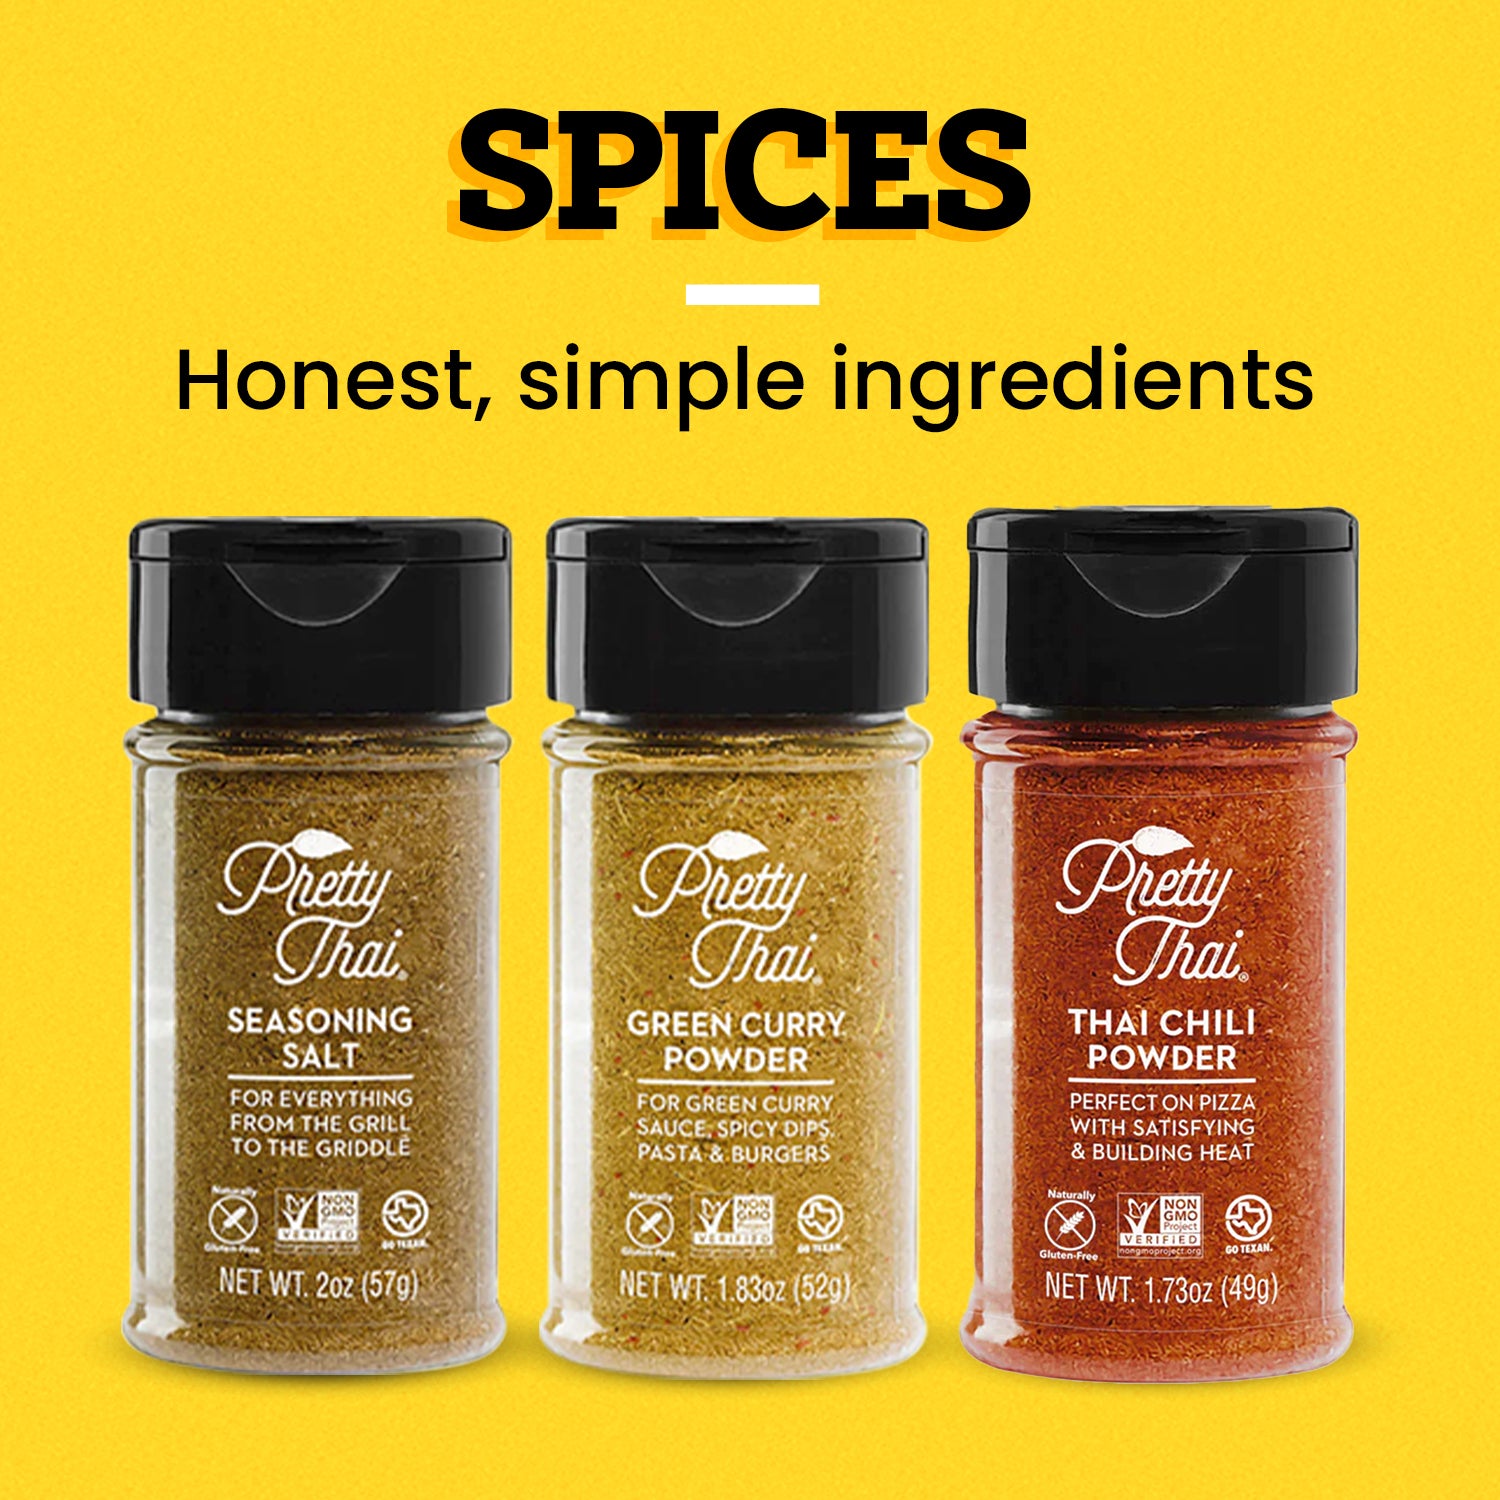 3 pretty thai spices with text written " honest, simple ingredients" on top over yellow background